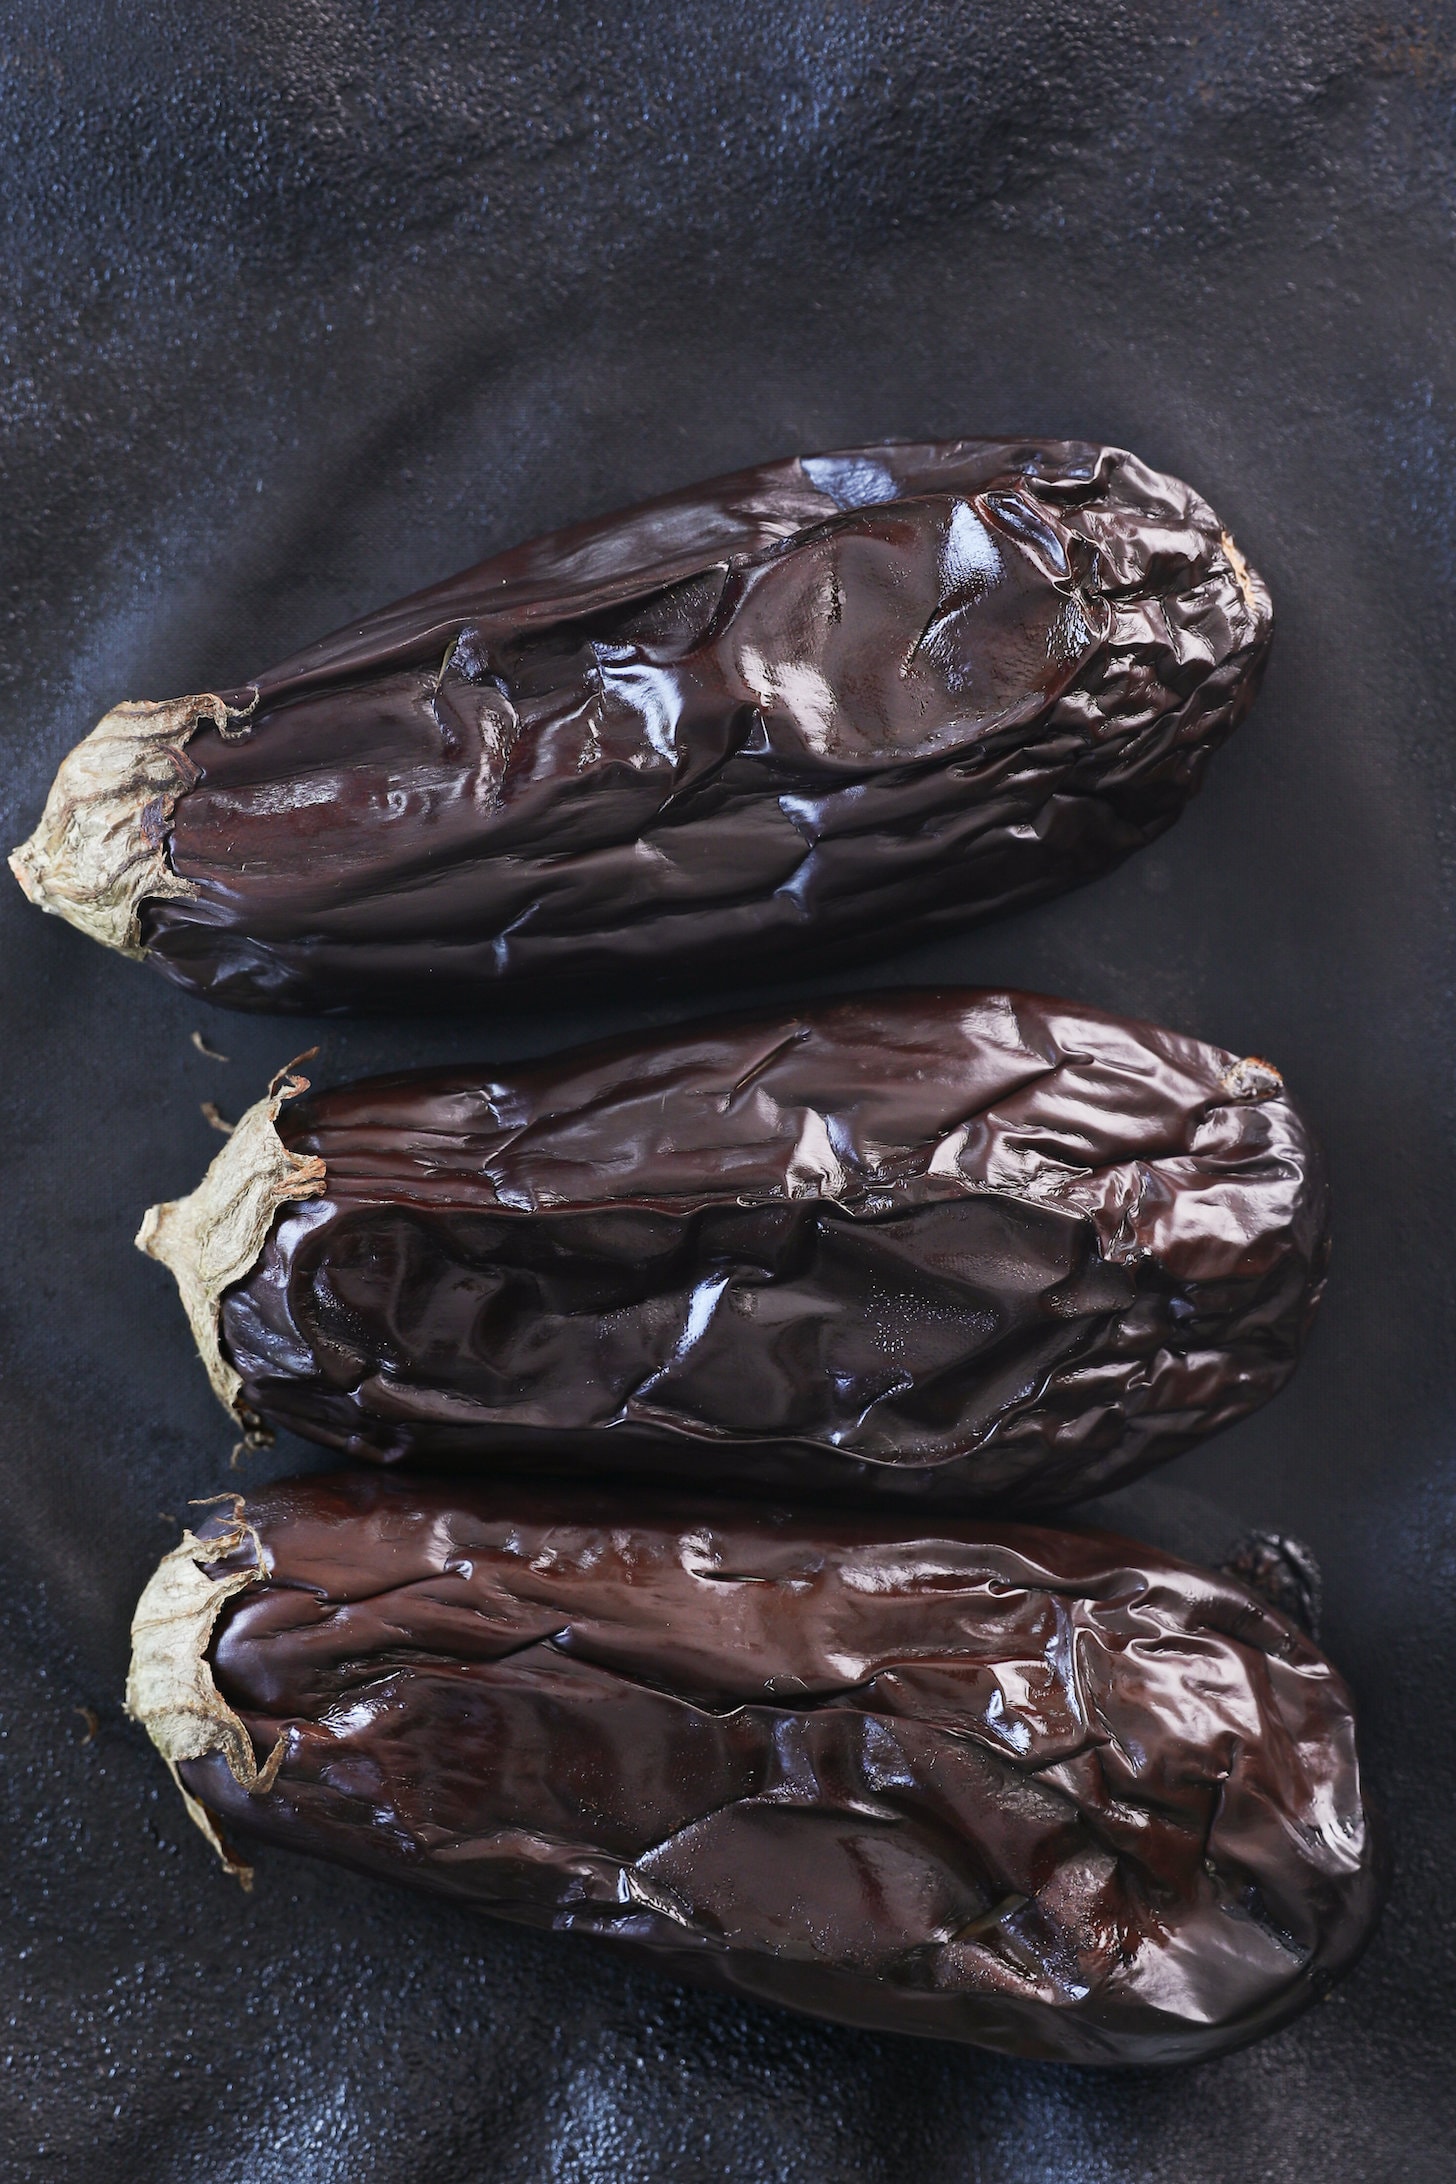 Three cooked eggplants side by side on a black plate.